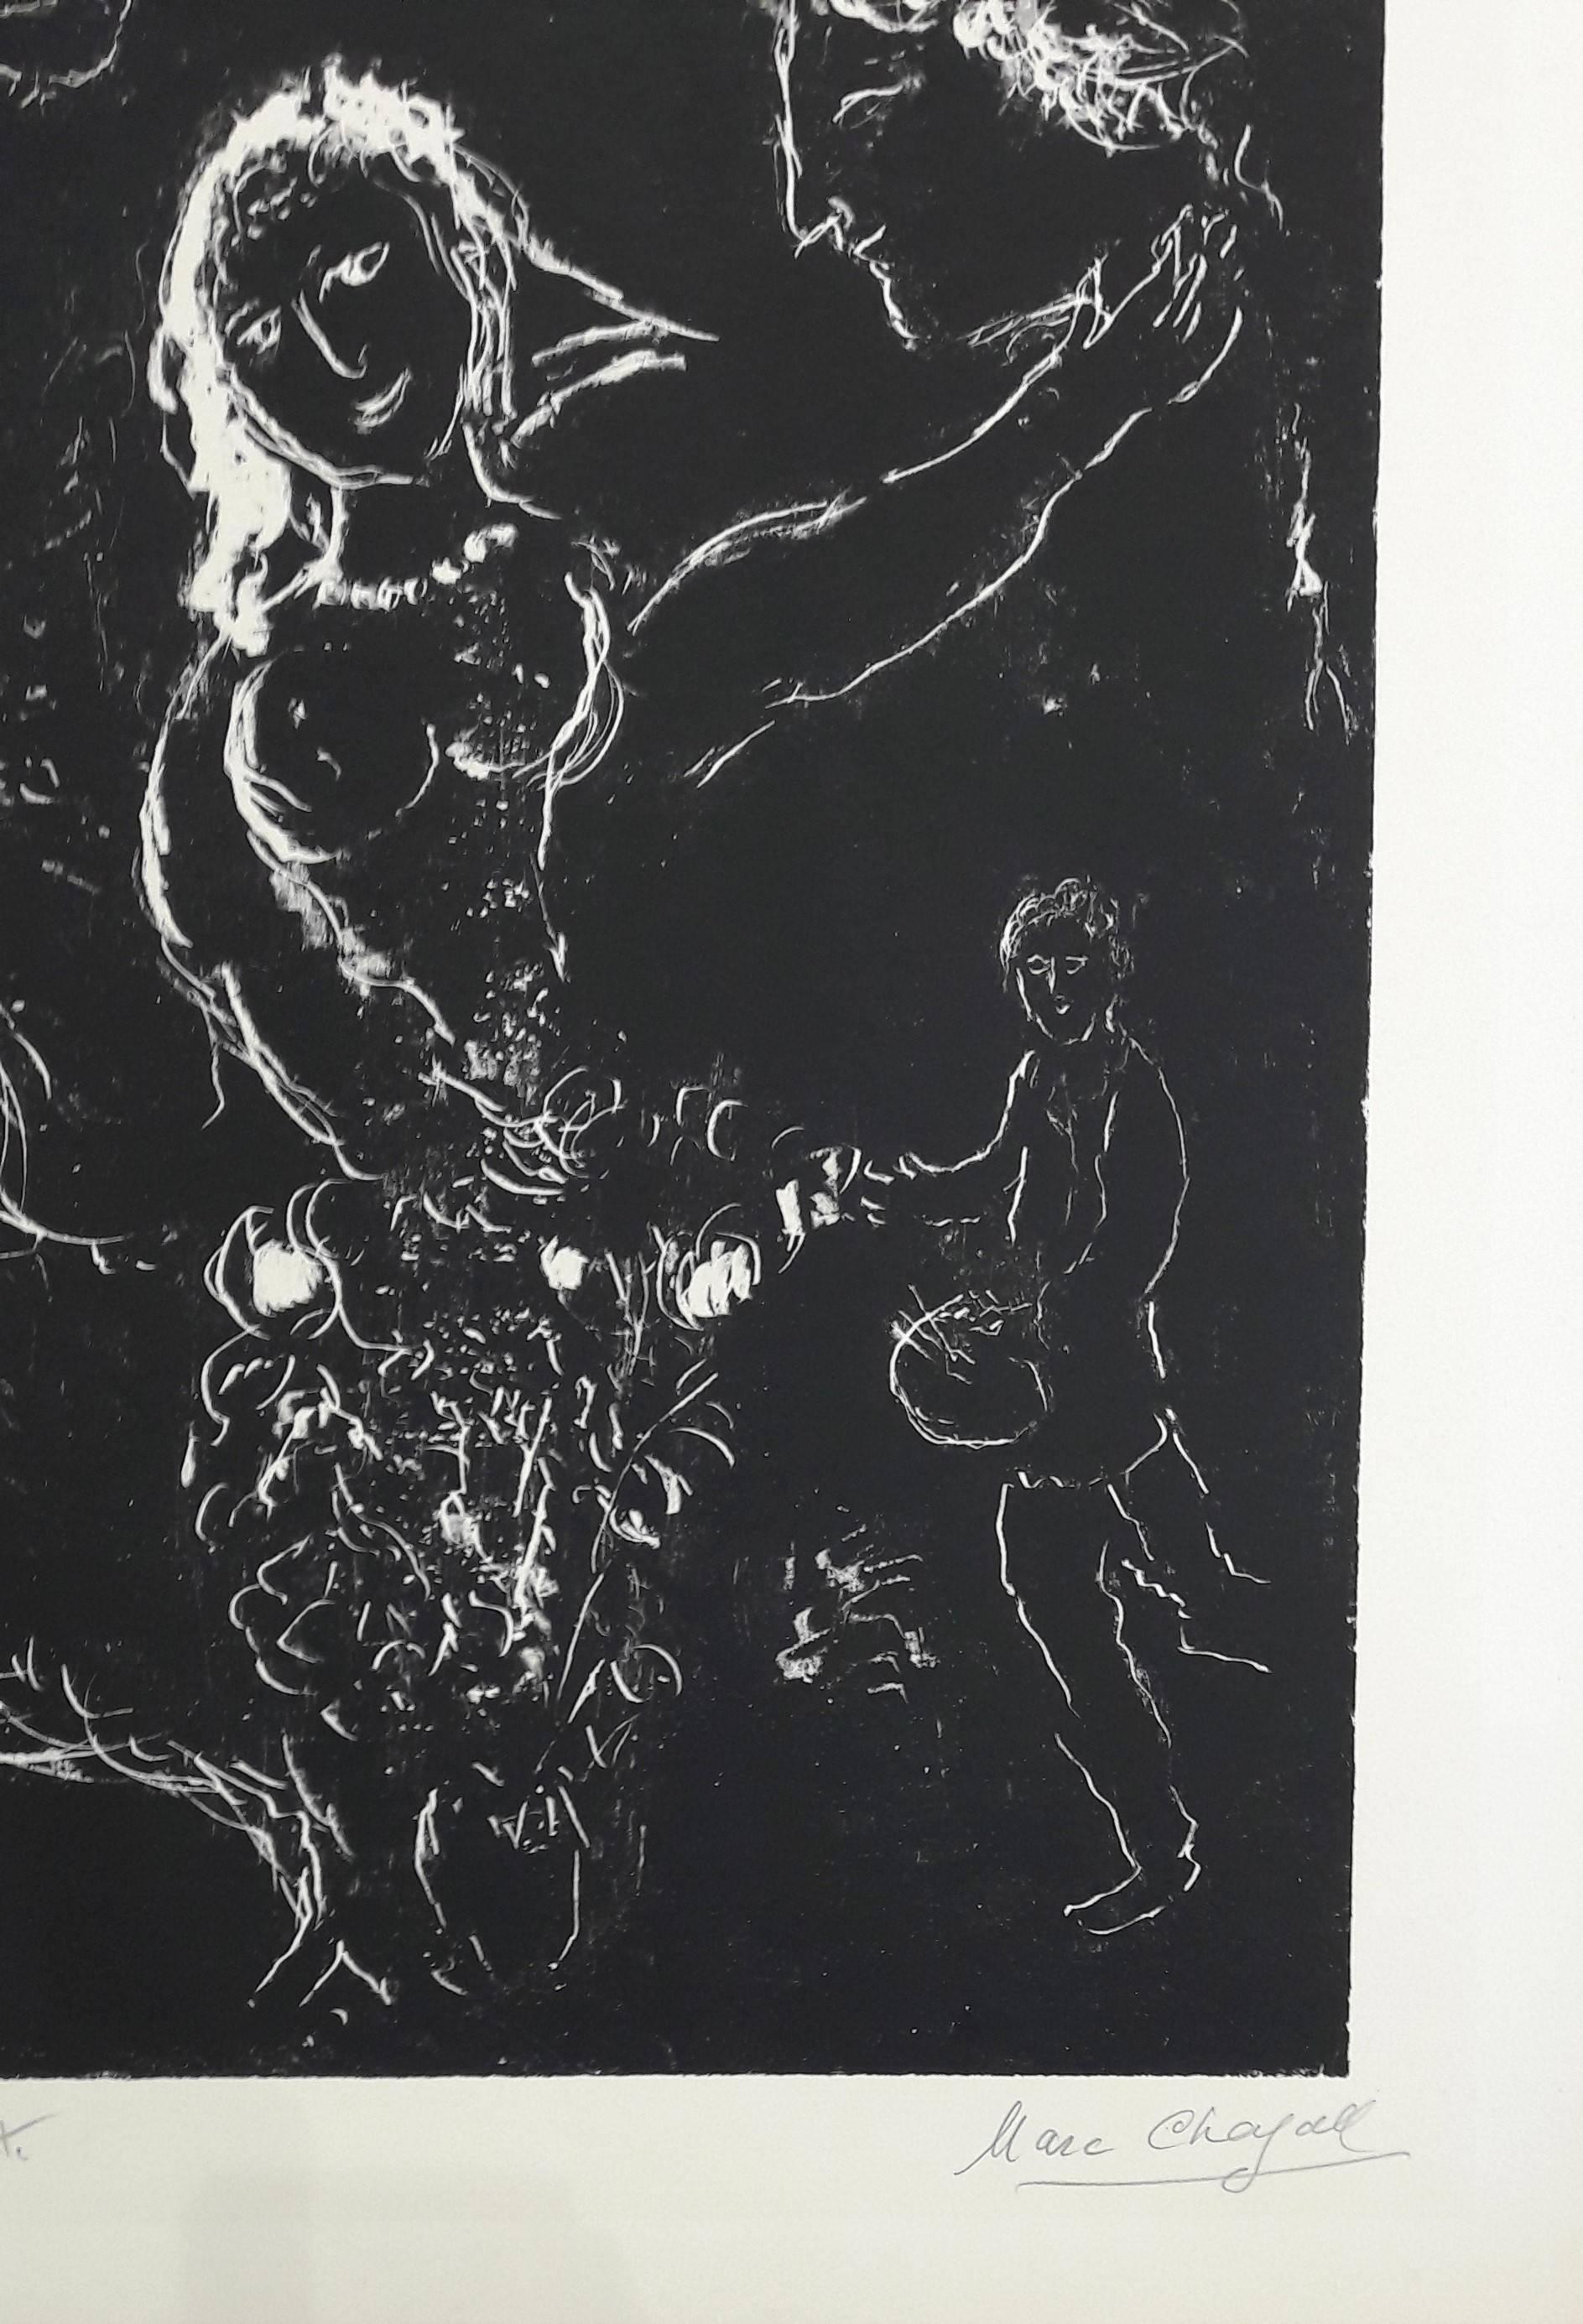 White On Black - Original Lithograph Handsigned - 1972 - Print by Marc Chagall